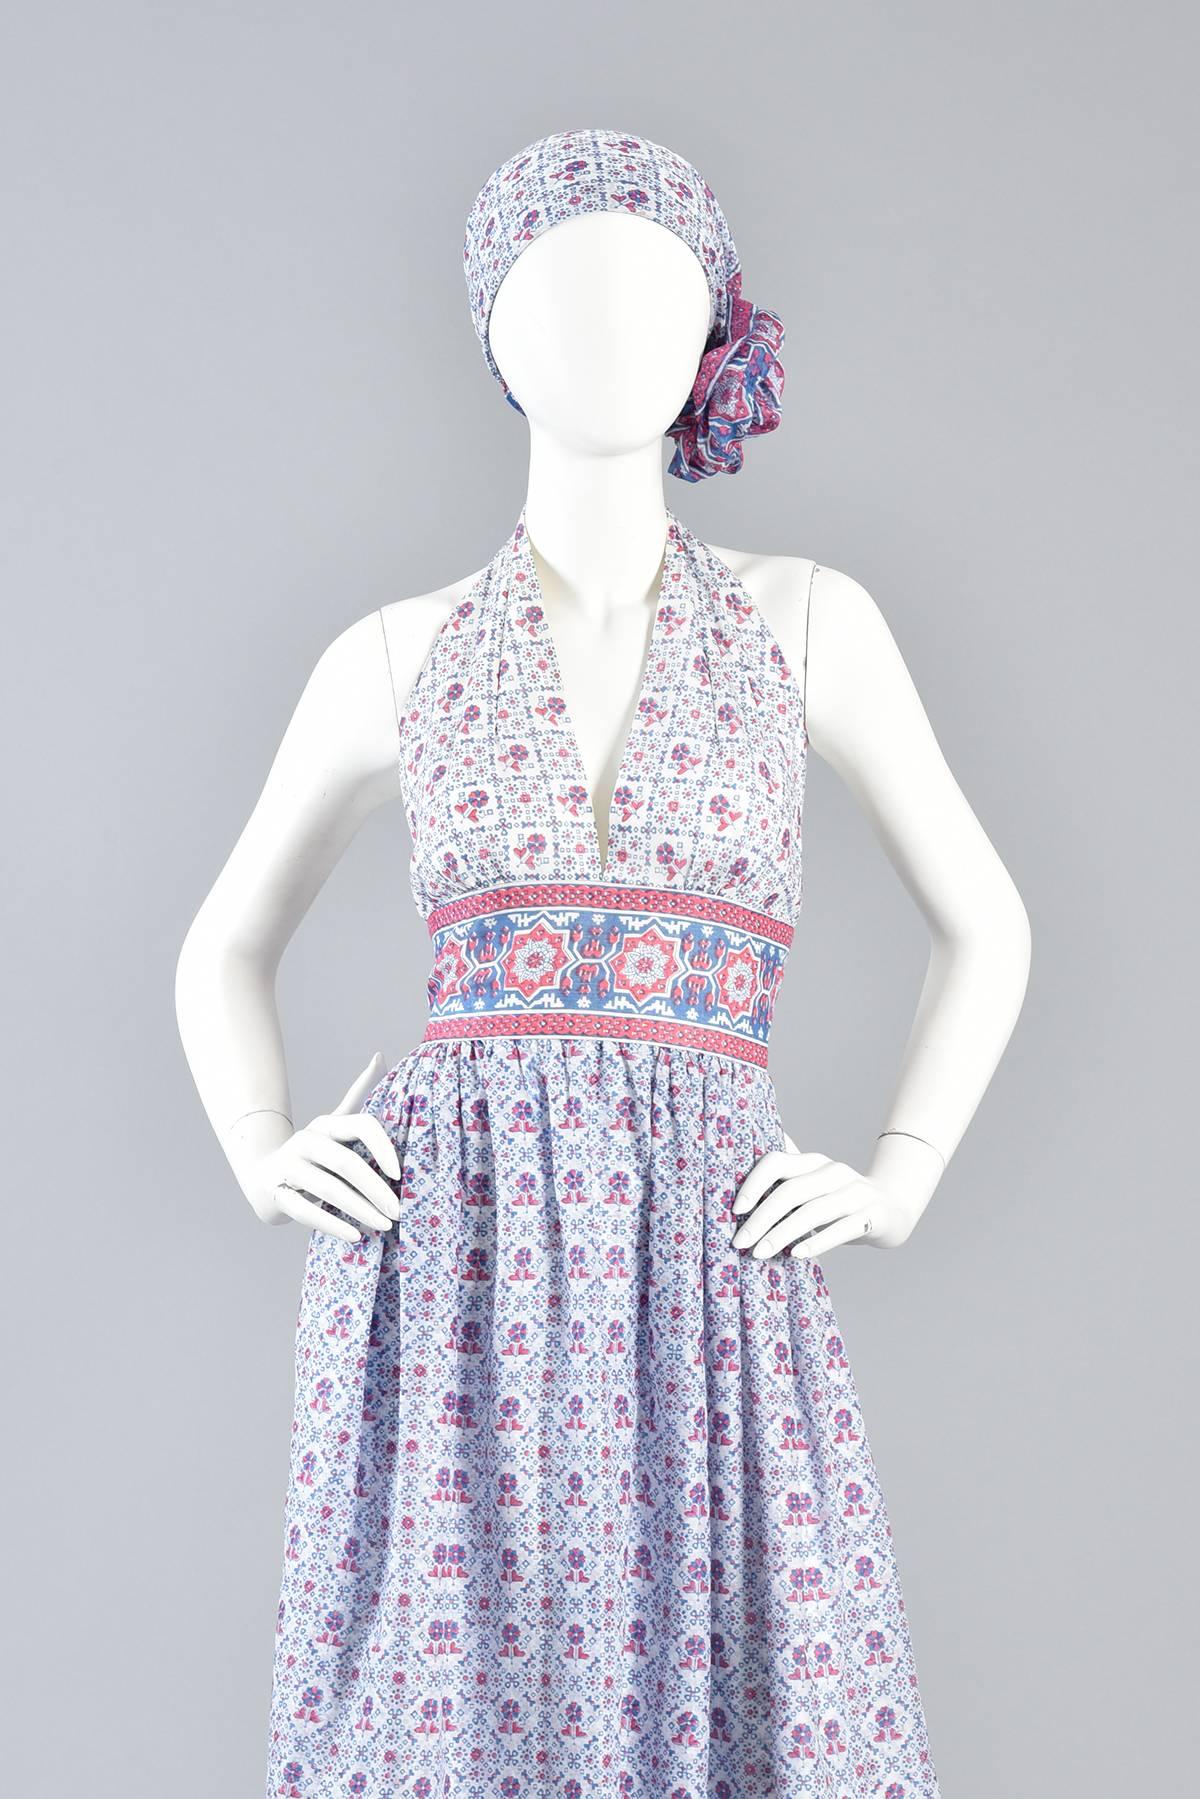 Women's Lovely 1970s Ethnic India Print Backless Cotton Halter Dress with Scarf  For Sale